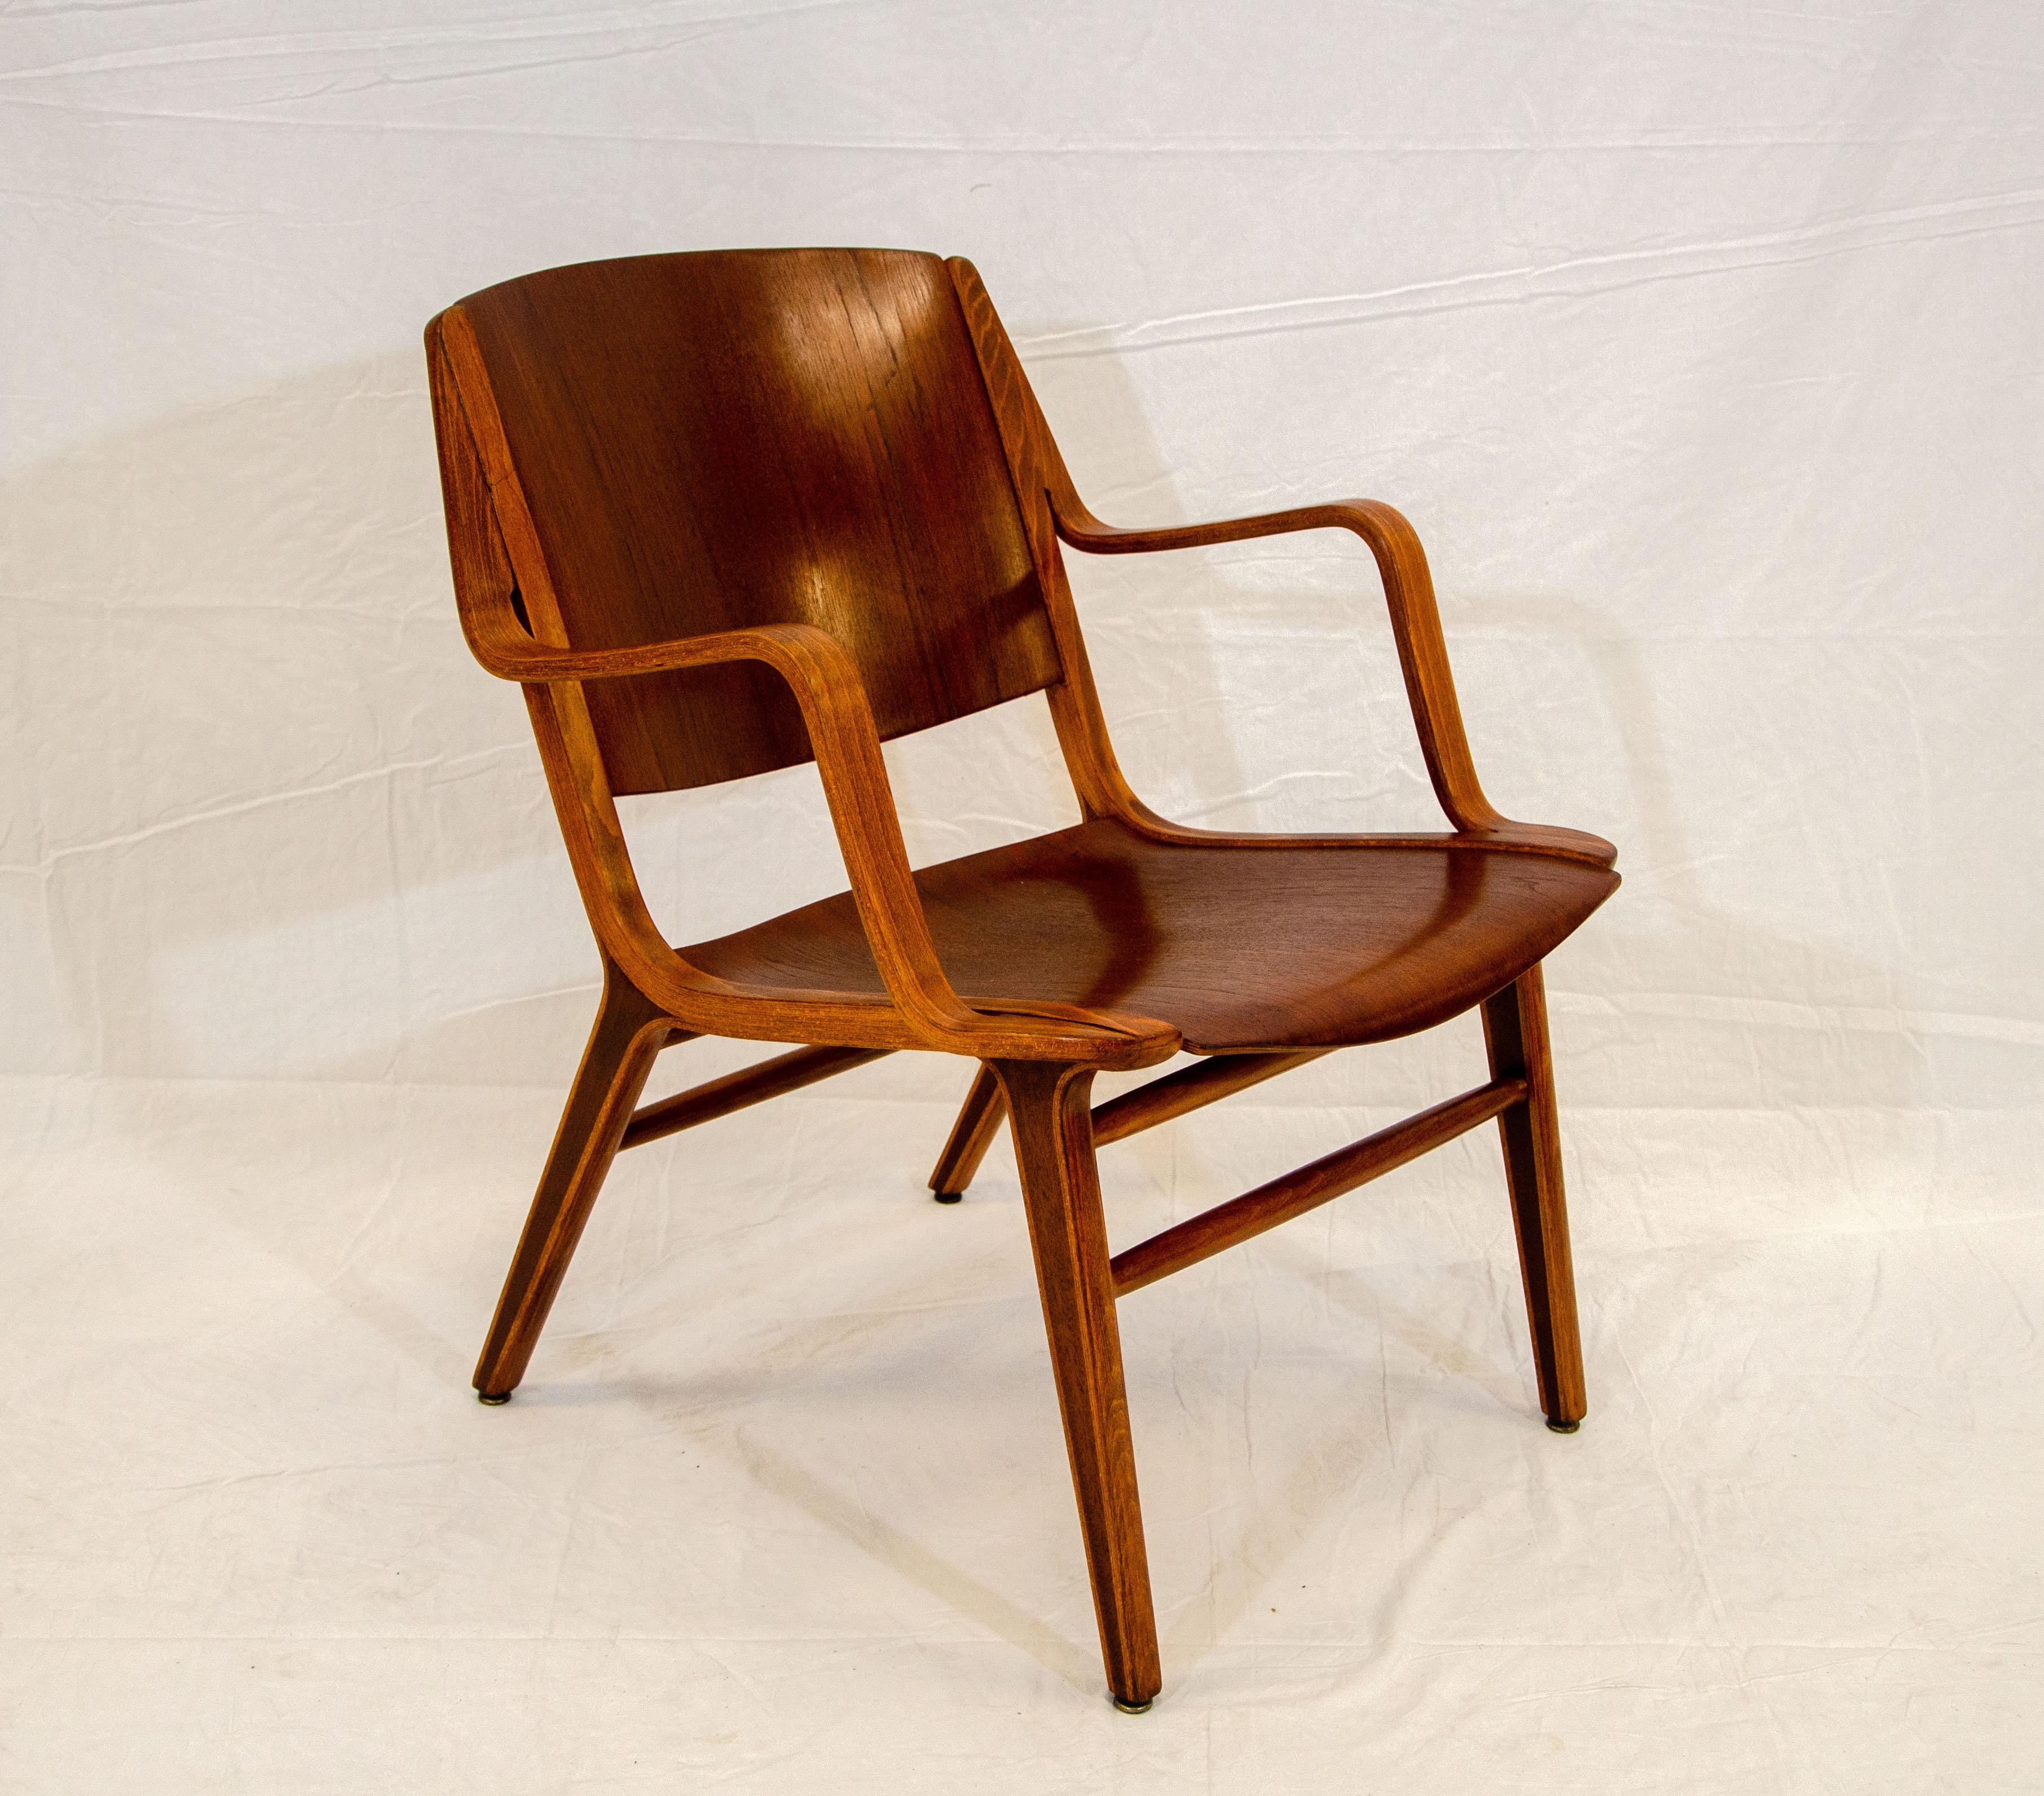 Bent Ply Ax Arm Chair by Peter Hvidt & Orla Mølgaard-Nielsen In Good Condition For Sale In Crockett, CA